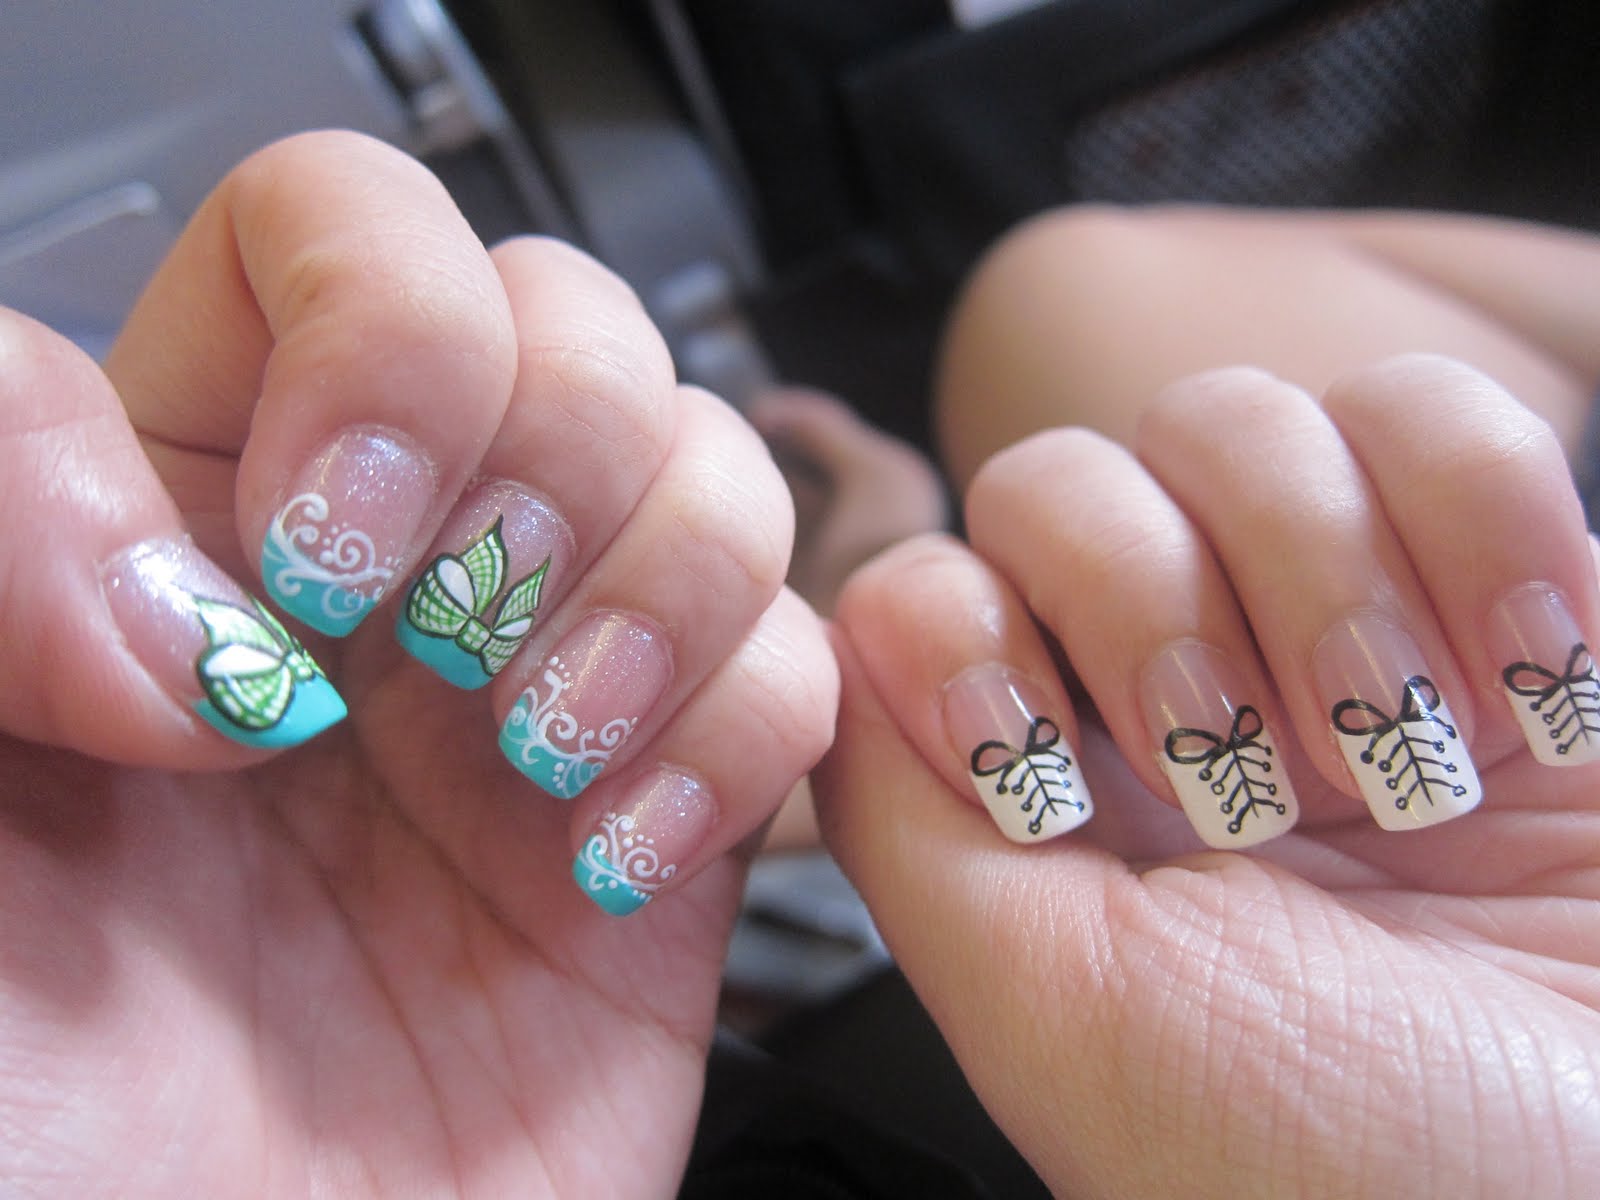 5. 15 Beautiful Nail Designs for Every Occasion - wide 9